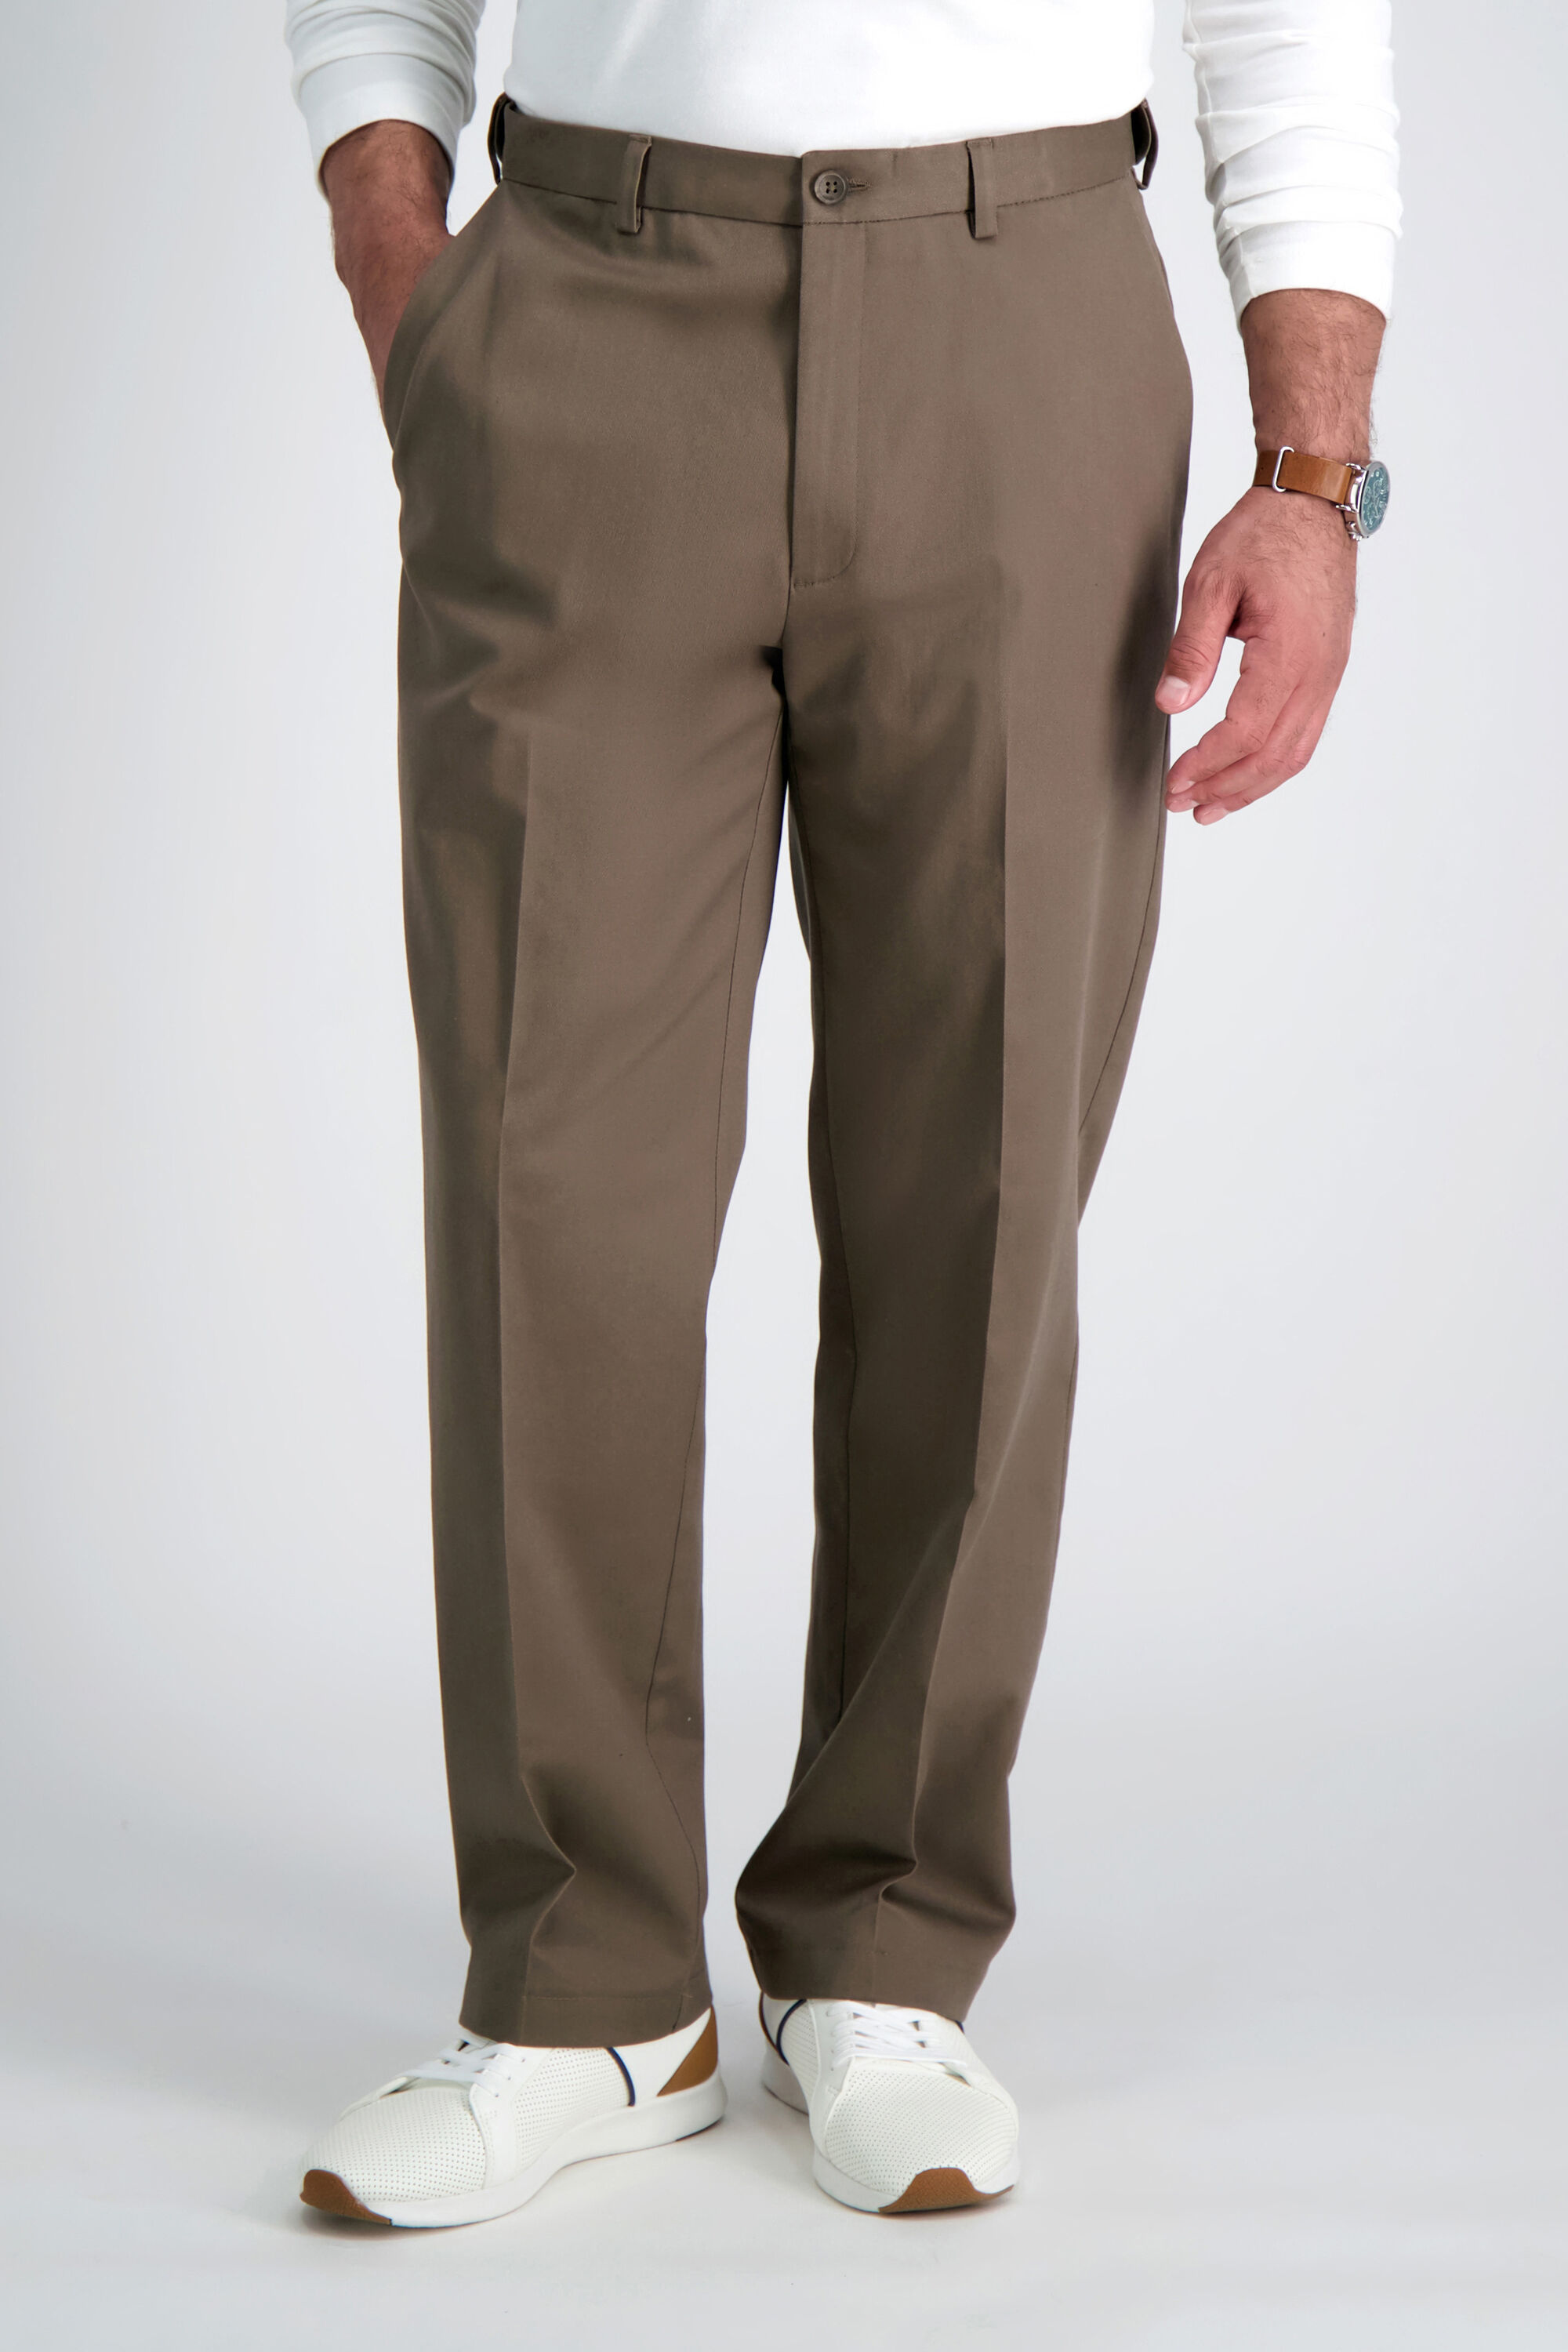 Men Relaxed Fit Trousers  Buy Men Relaxed Fit Trousers online in India